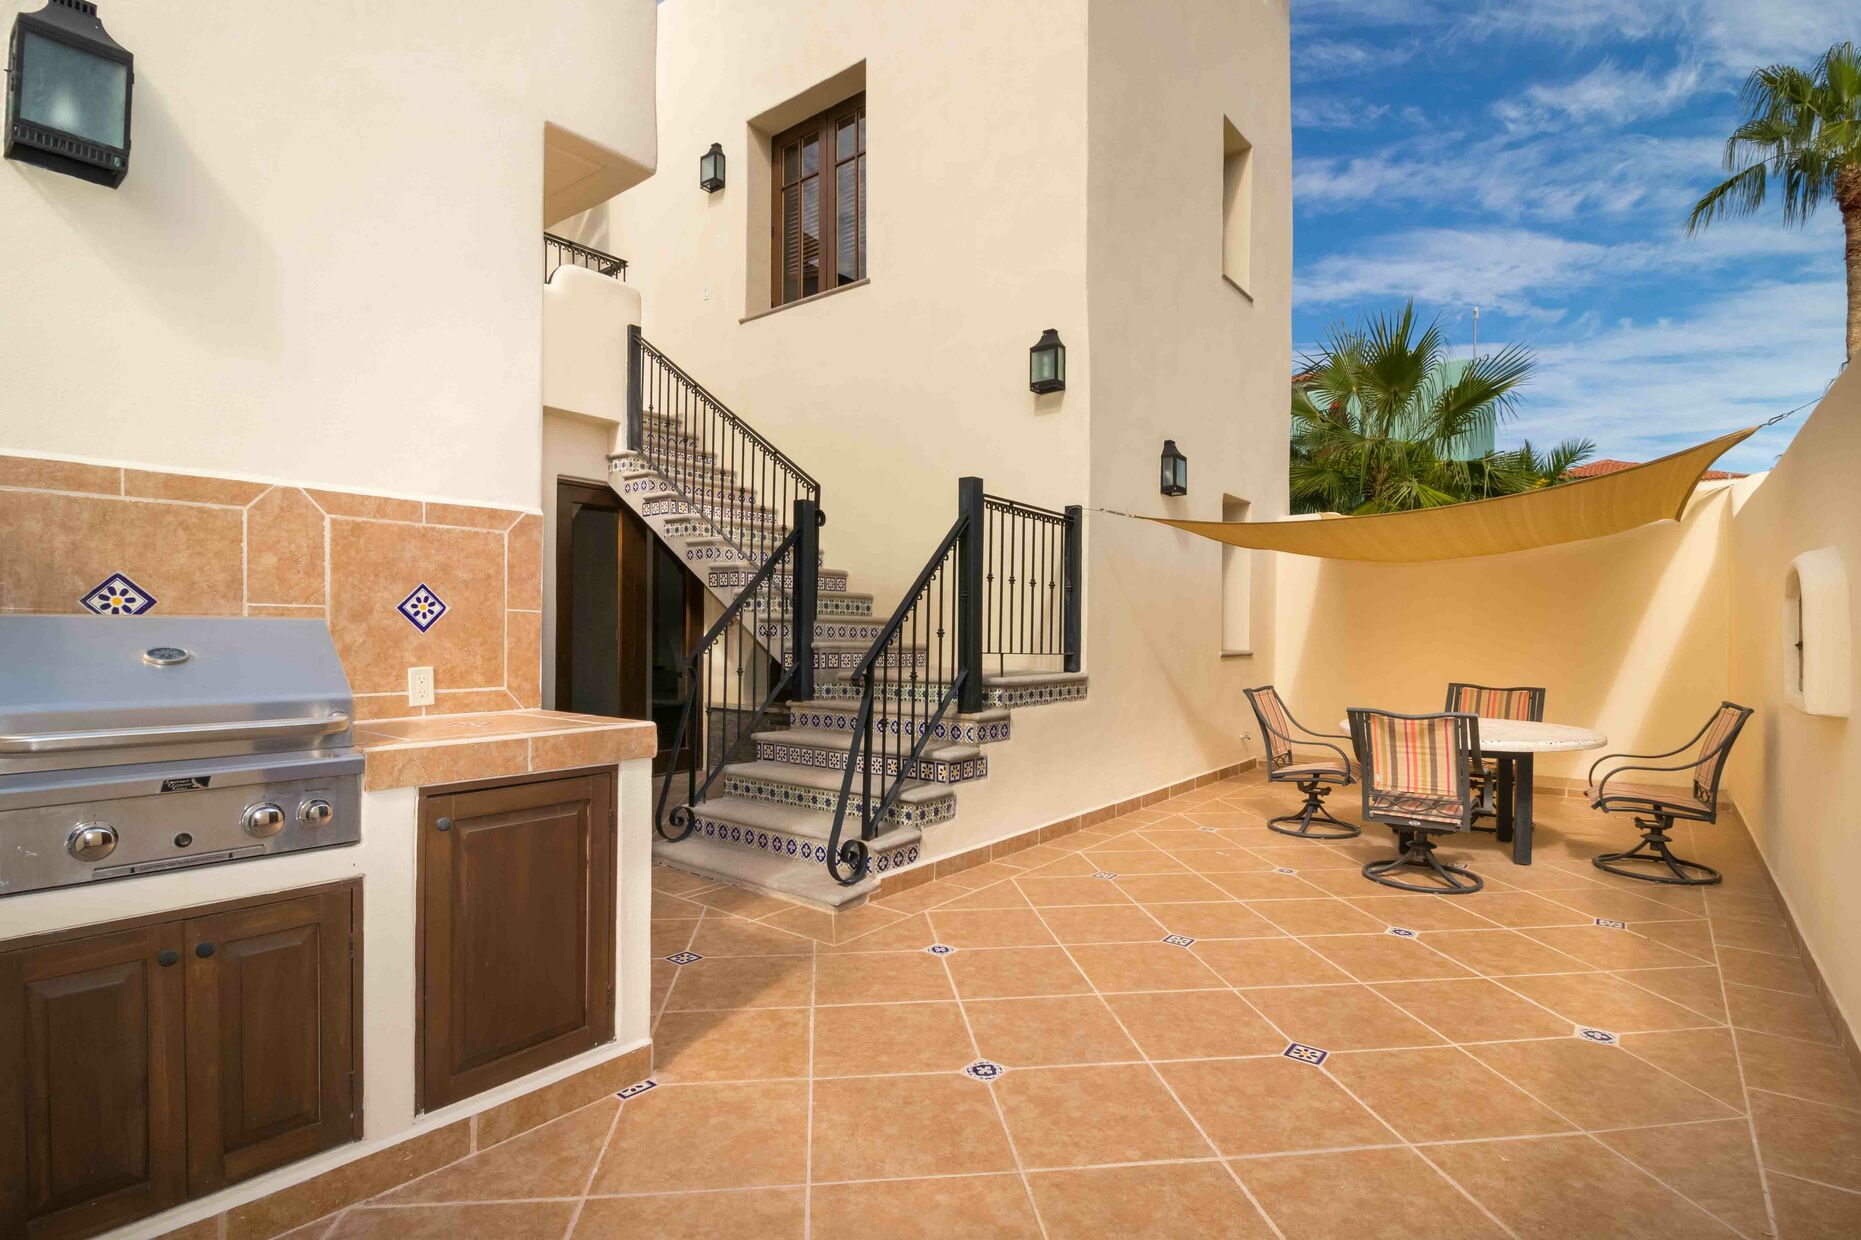 Downstairs Patio, patio furniture and BBQ grill. wider stairs